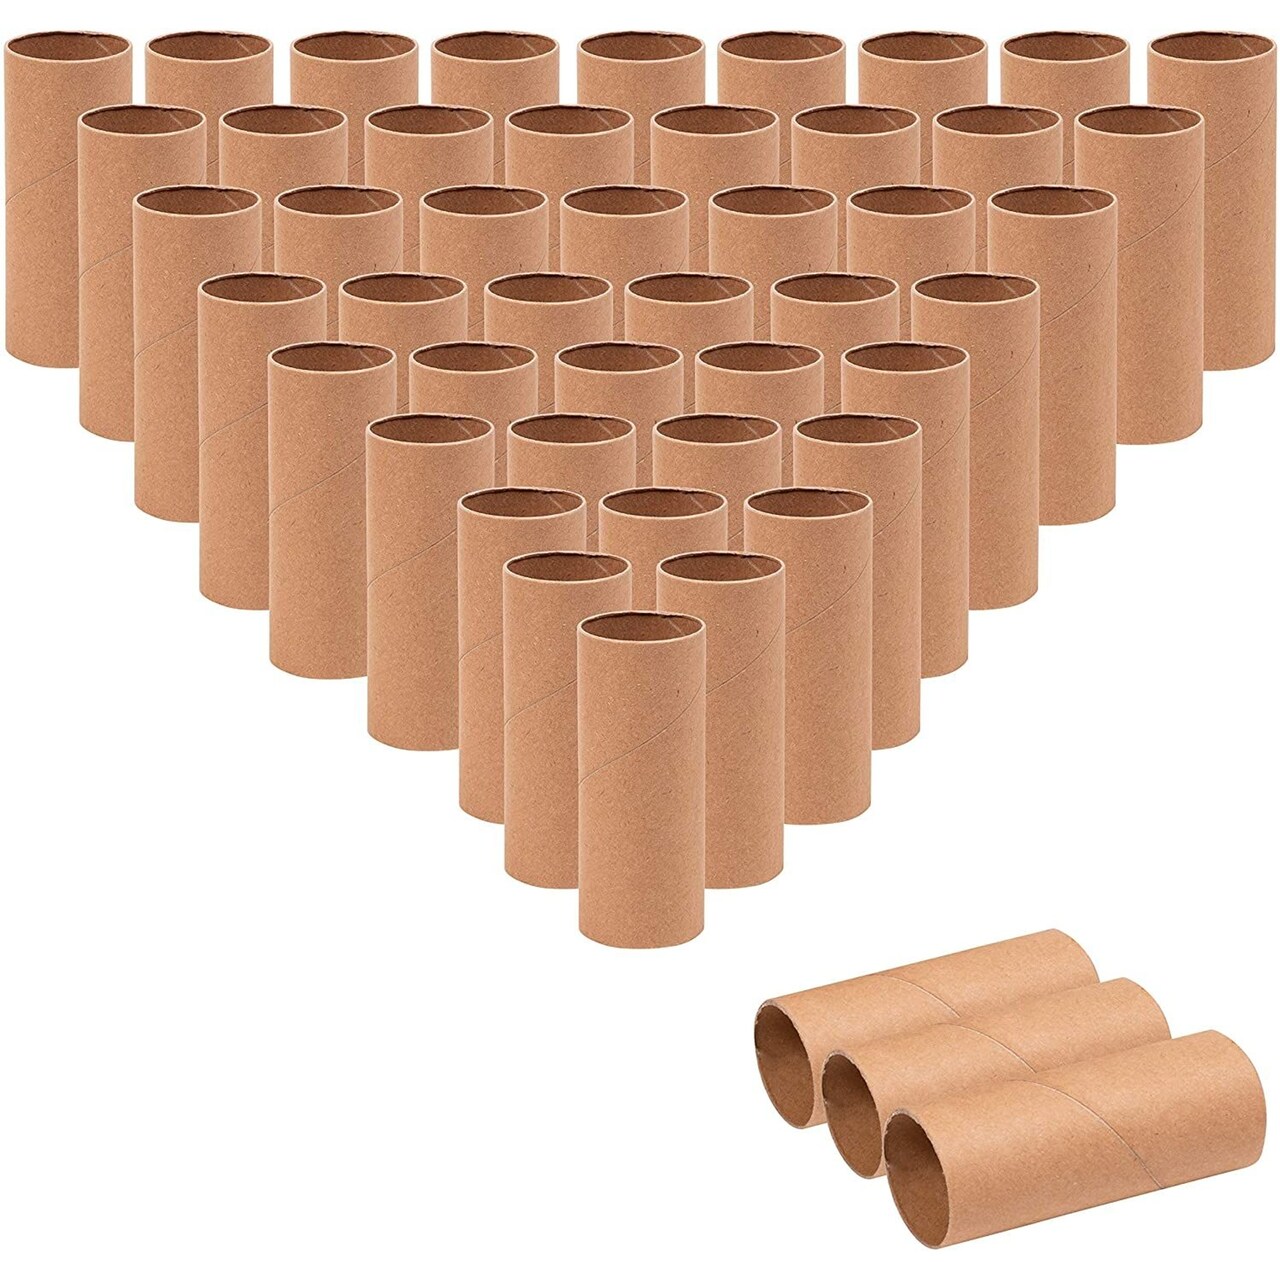 48 Pack Empty Toilet Paper Rolls for Crafts, Brown Cardboard Tubes for DIY,  Classrooms, Dioramas (1.6 x 4 In)